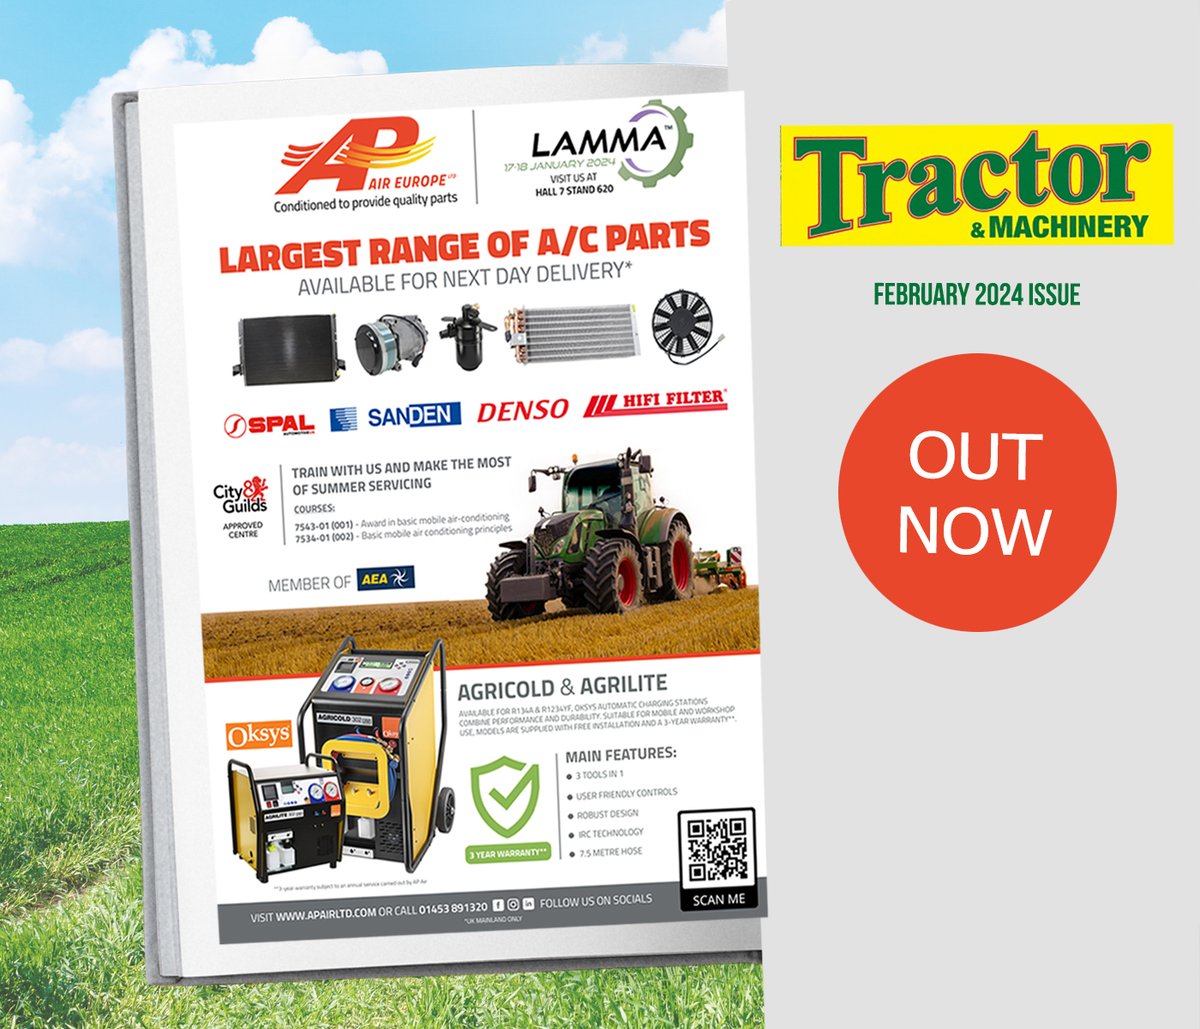 🗞️ 🚜❄️Can’t have too much of a good thing! 
We’re back in the latest issue of #Tractor & #Machinery mag which is dispatched today 👍
#tractorandmachinery #airconparts #acspares #tractorparts #LAMMA24 #SPAL #denso #sanden #hififilter #cityandguilds #training #fgas #agengineer